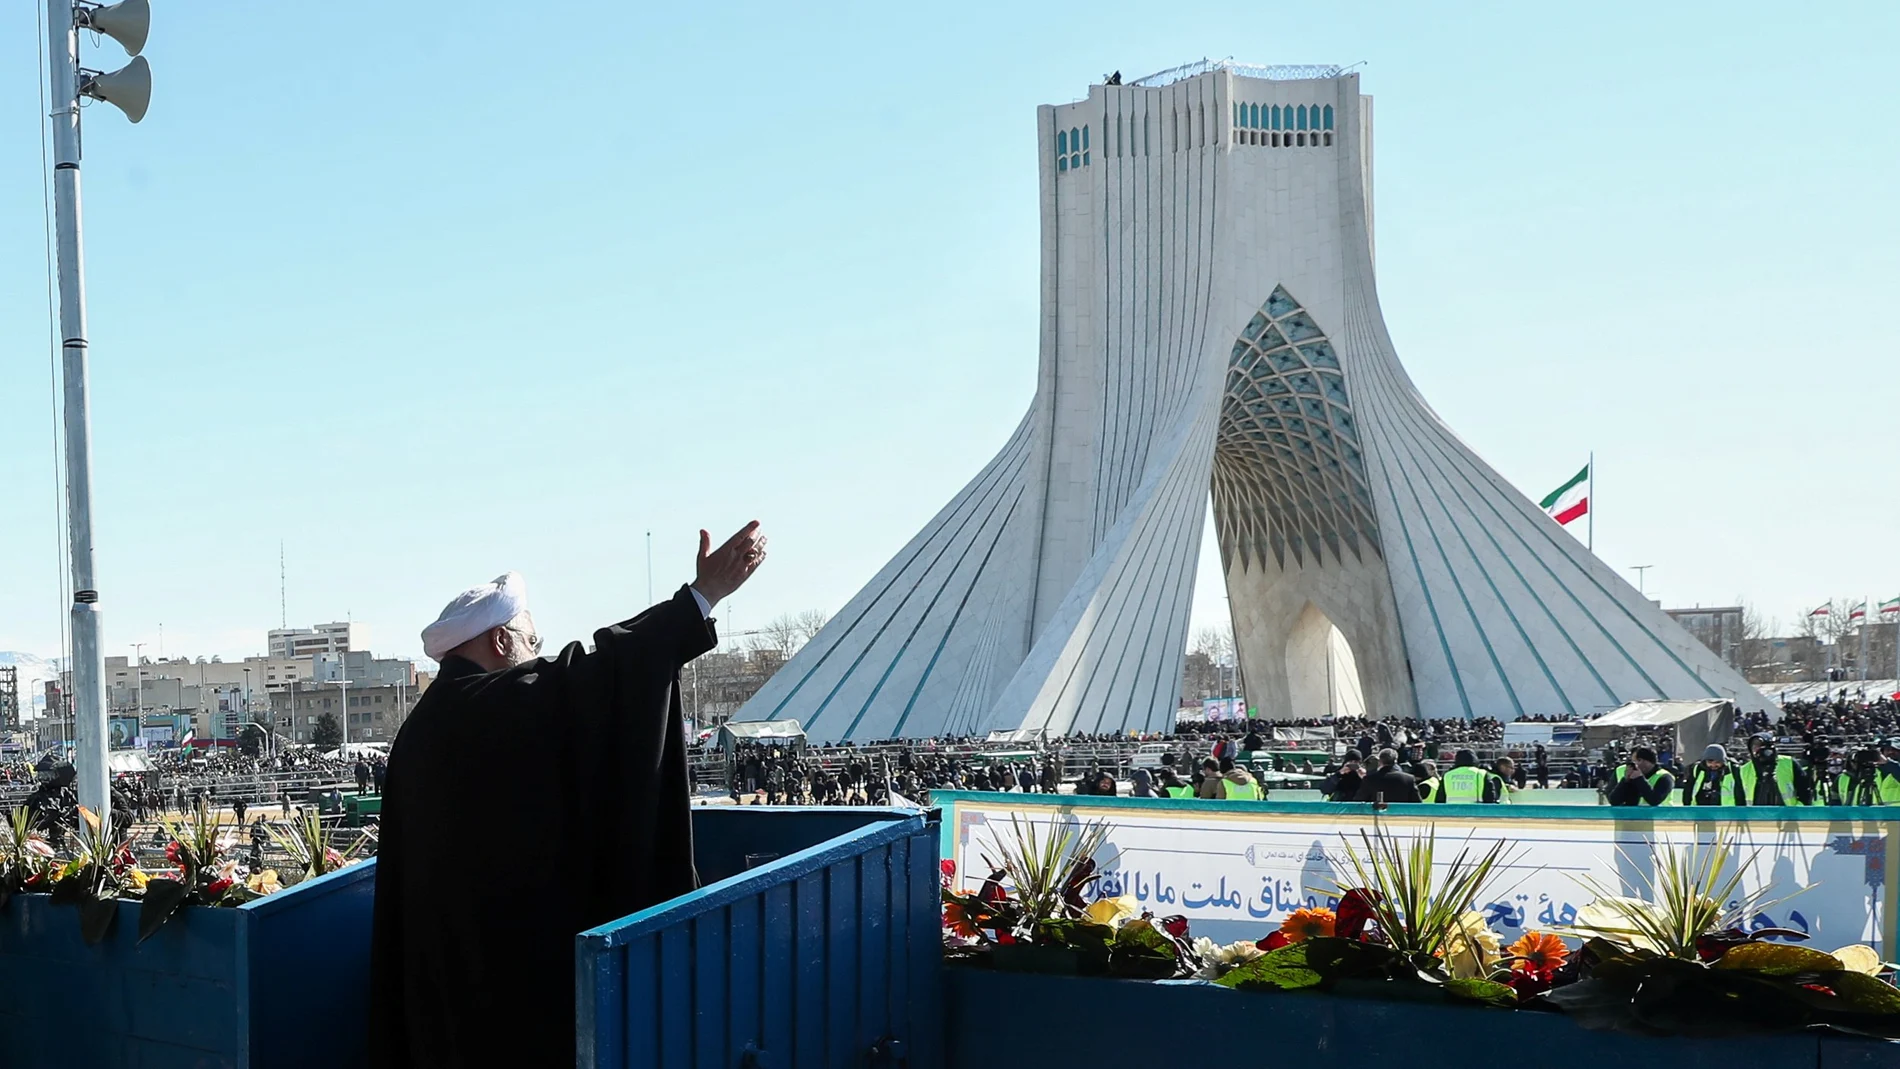 Iranian President Hassan Rouhani salutes the crowd during the commemoration of the 41st anniversary of the Islamic revolution in Tehran